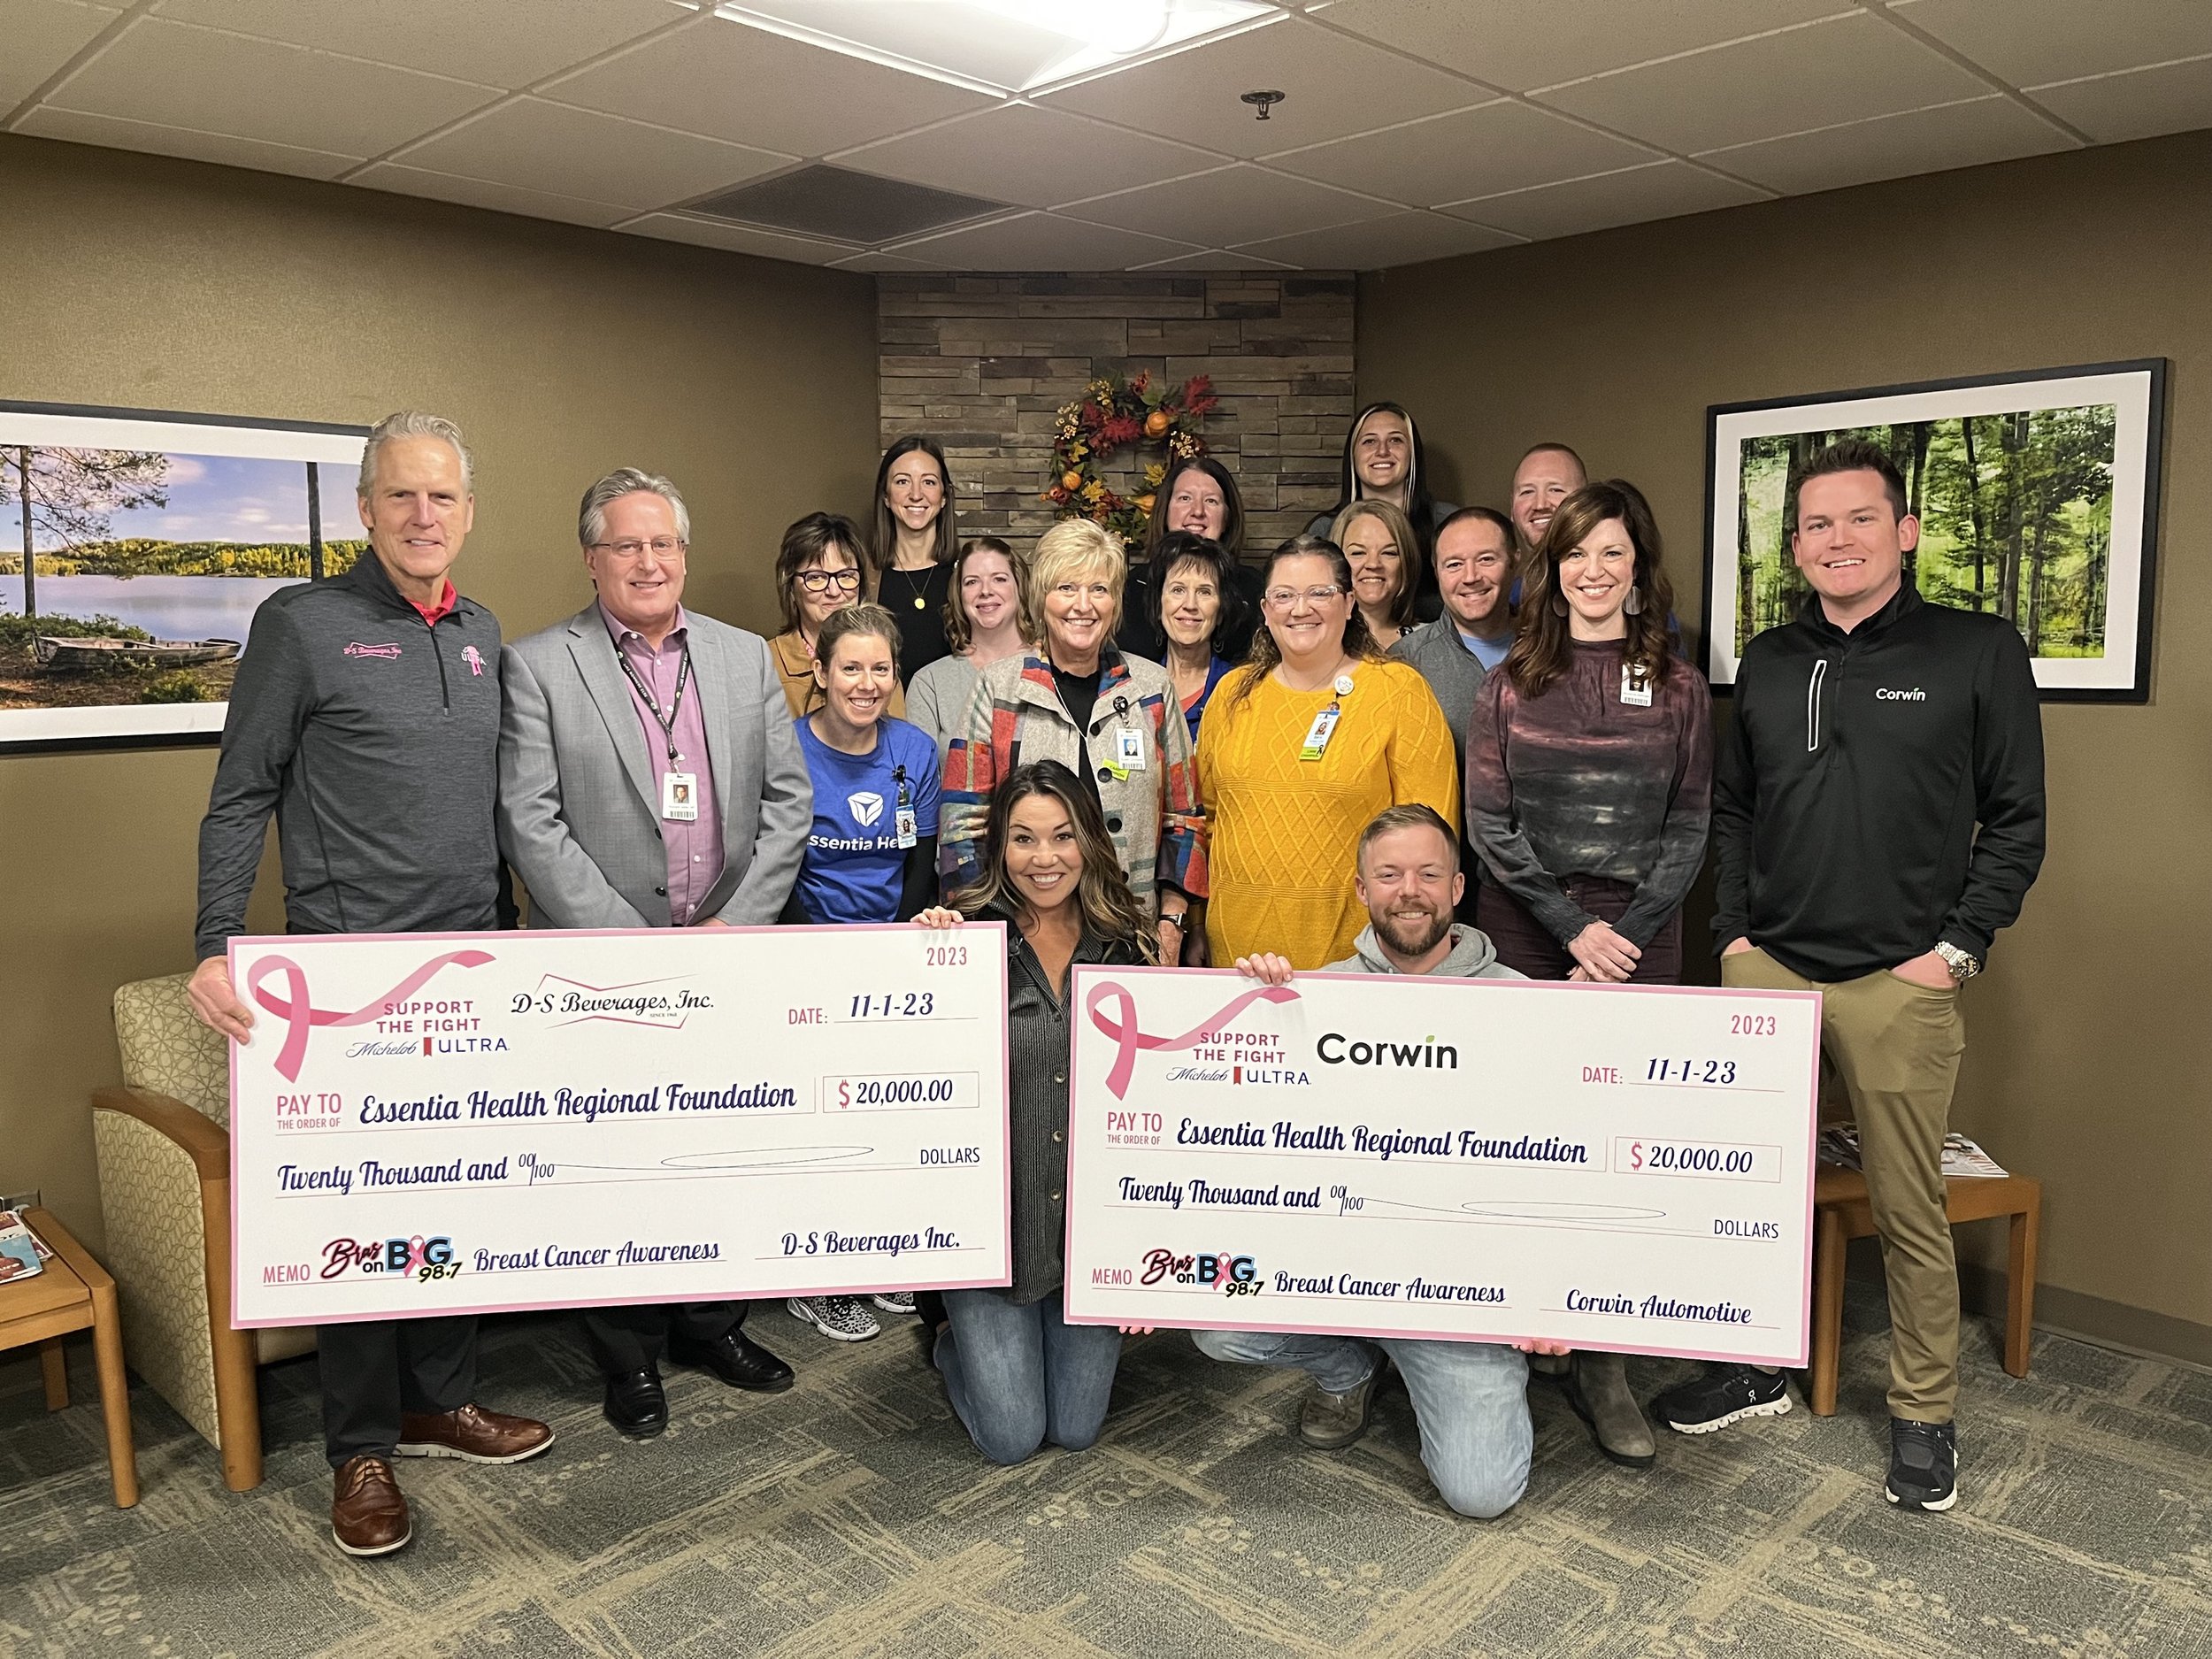 Bras On Big 98.7” Campaign Results In $40,000 For Essentia Health